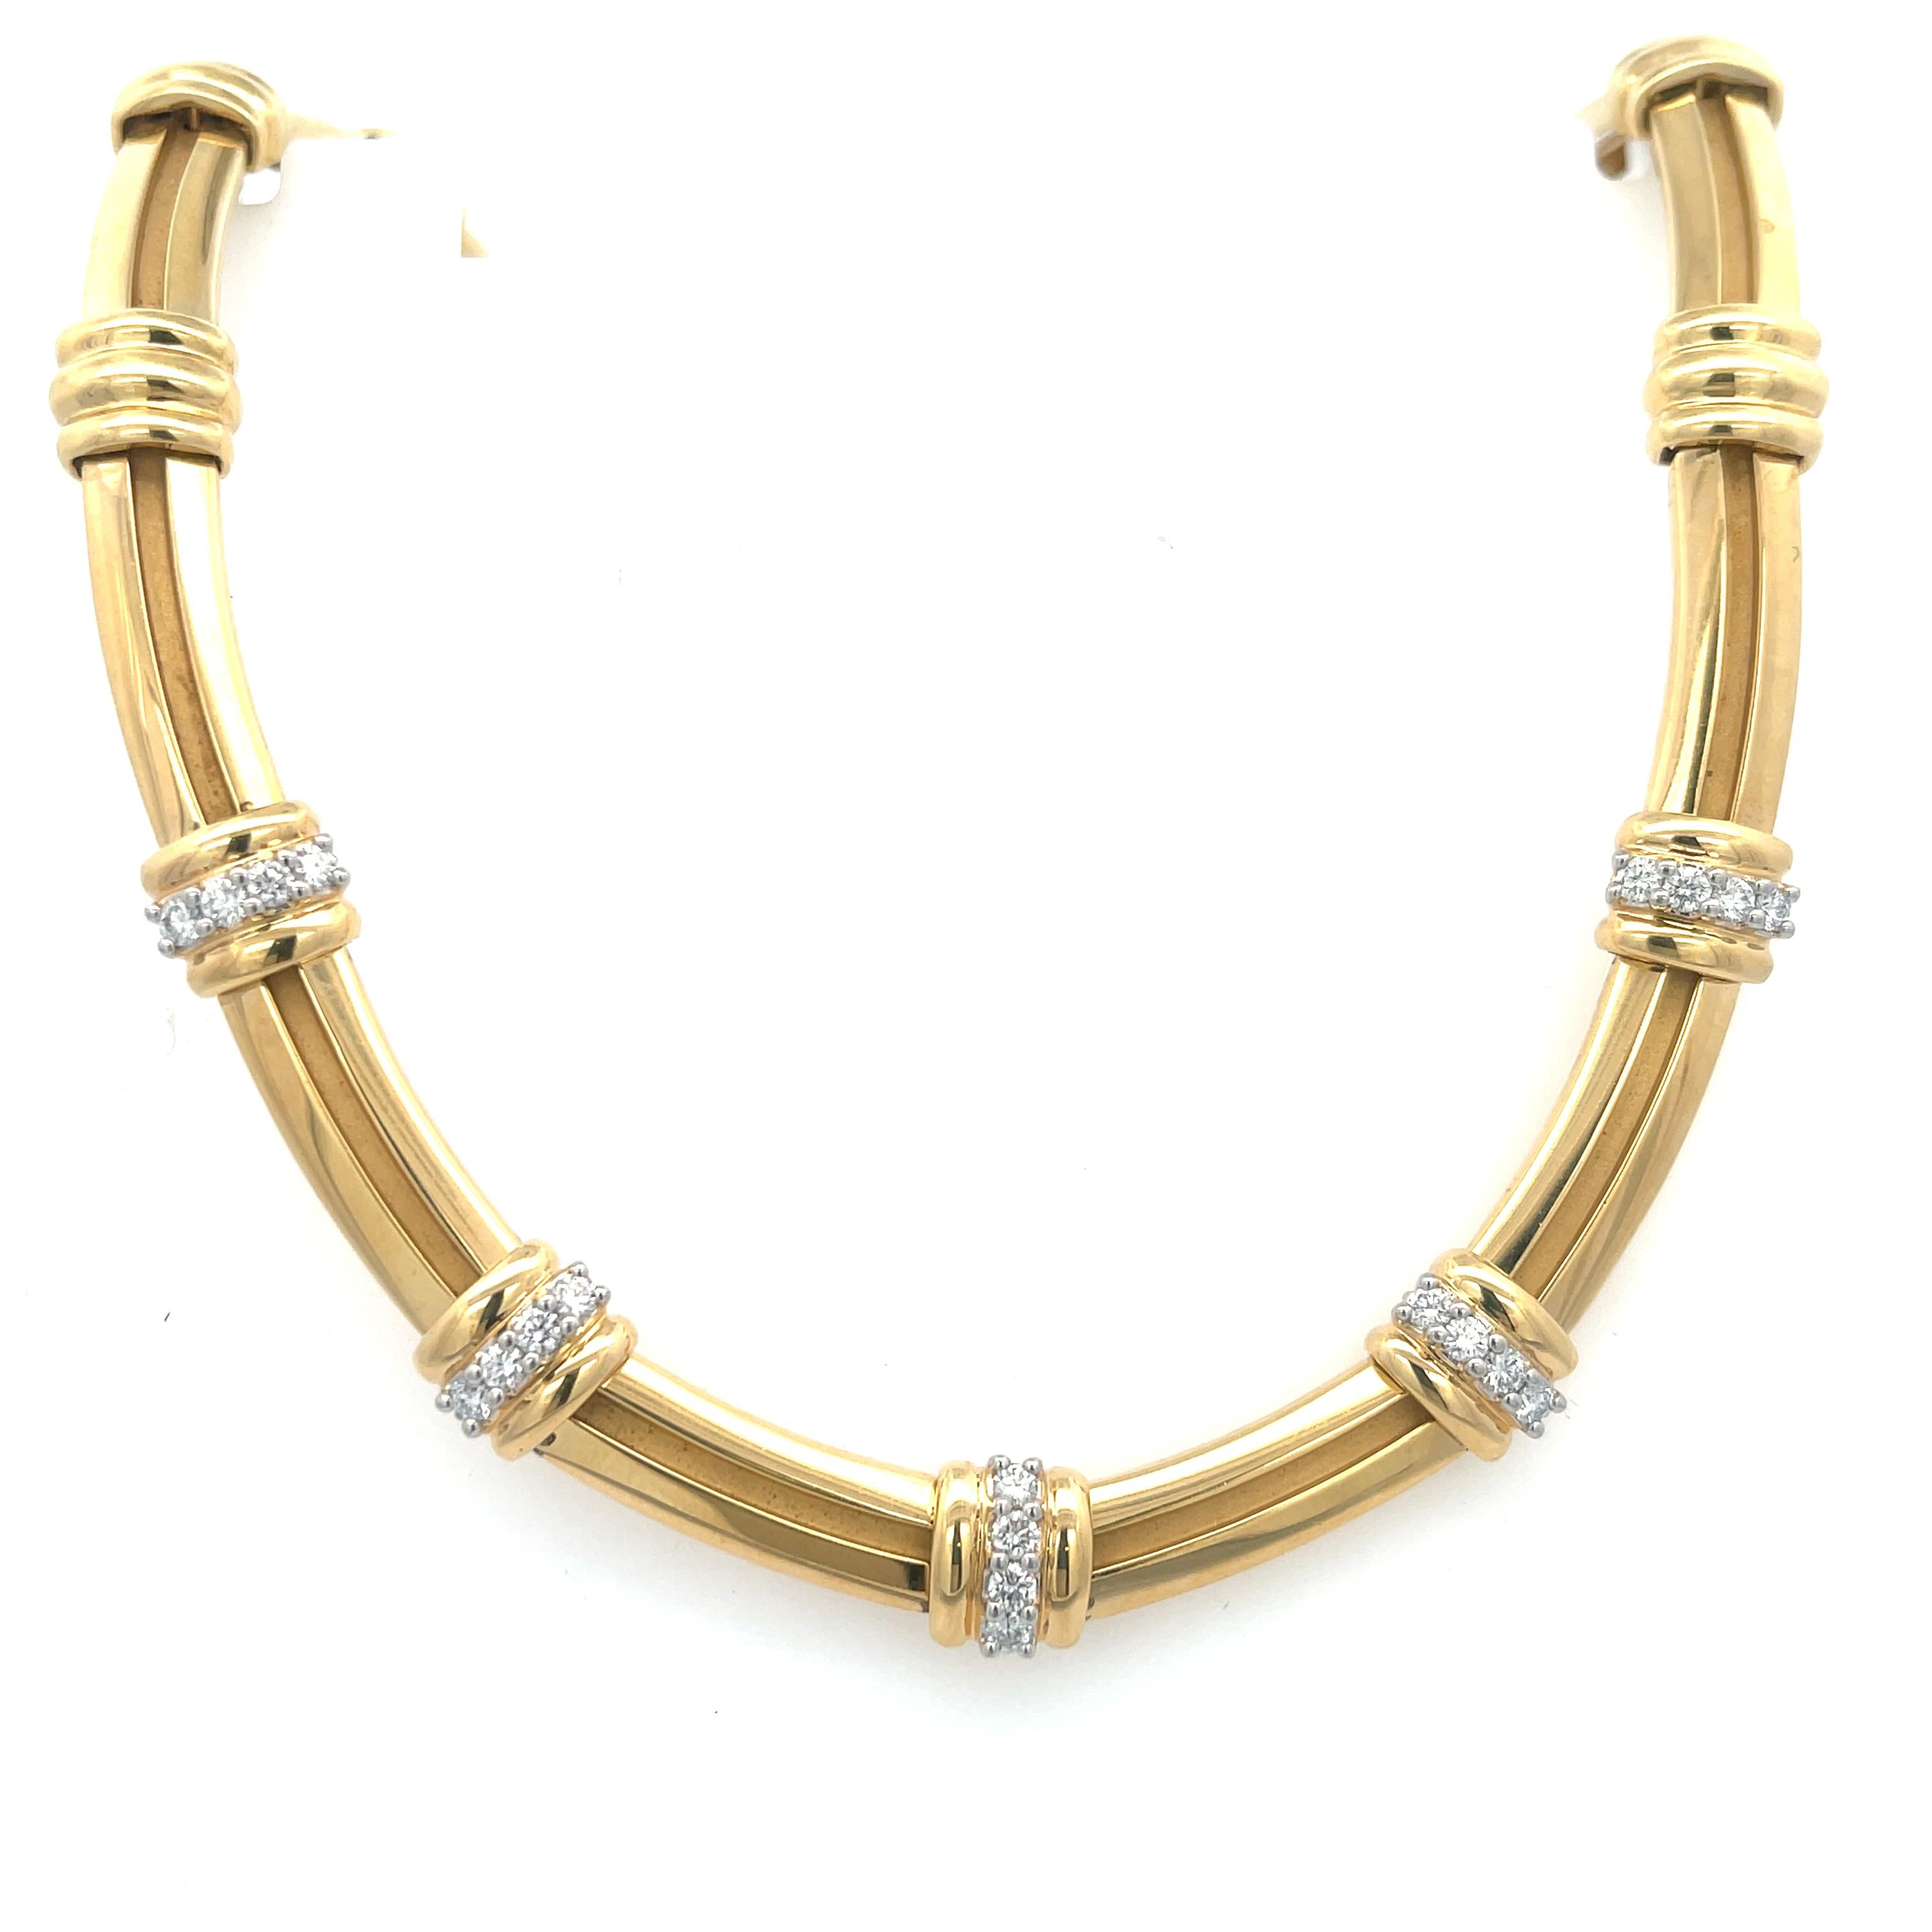 Estate Tiffany & Co. Diamond Station Necklace in 18K Yellow Gold. The necklace features five stations of brilliant round diamonds with 1.90ctw. The necklace is 15.25